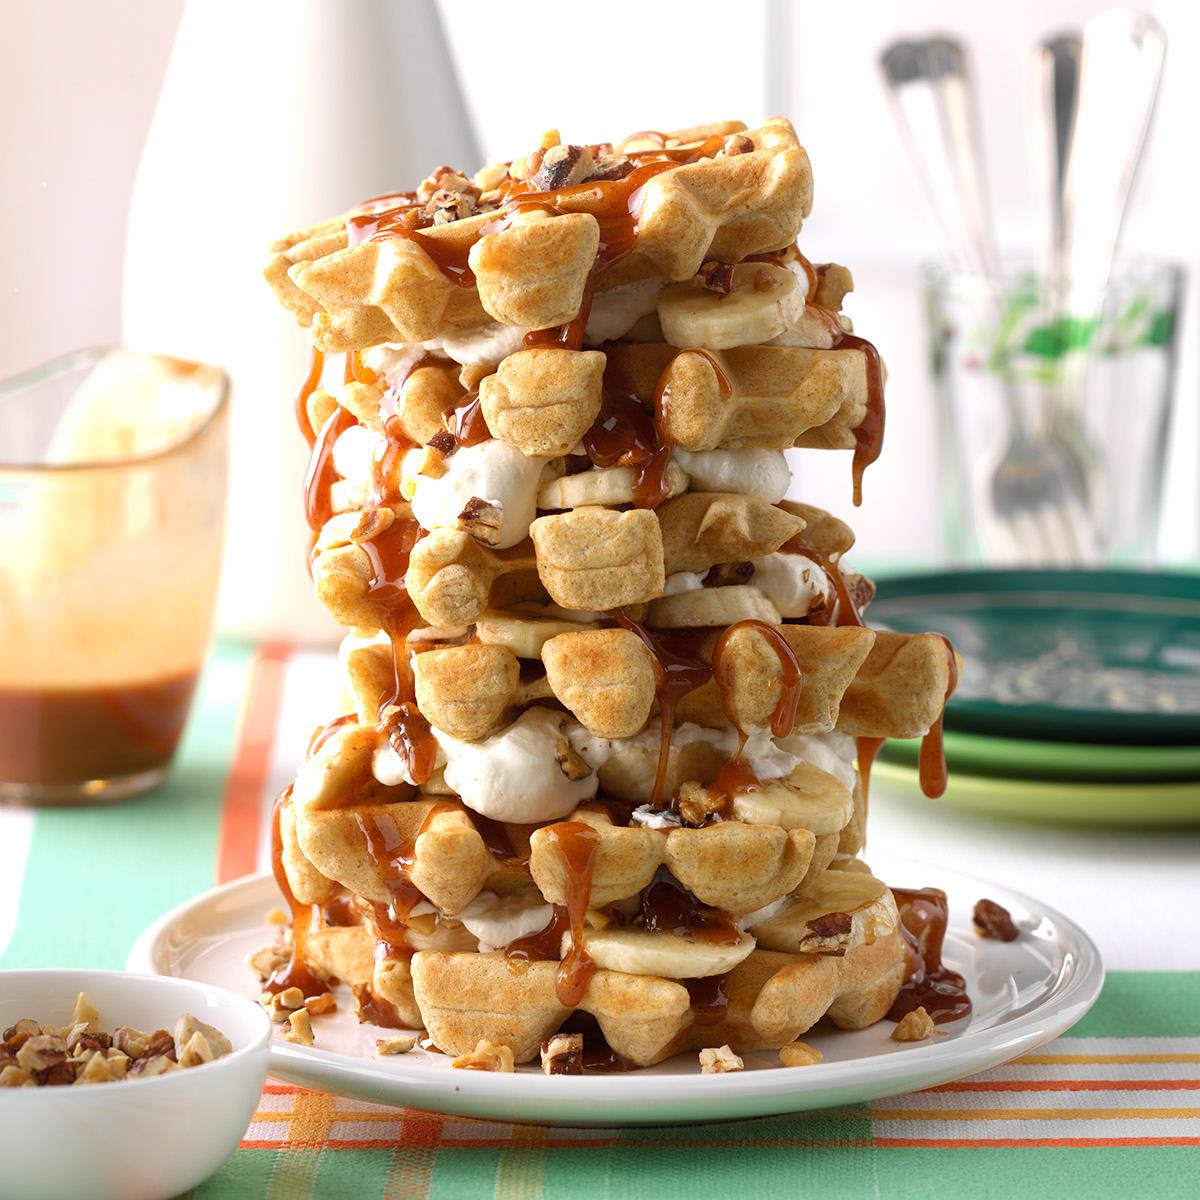 The Belgian Waffle Co Has Started Doing Waffle Cakes & That's Got us Super  Excited!